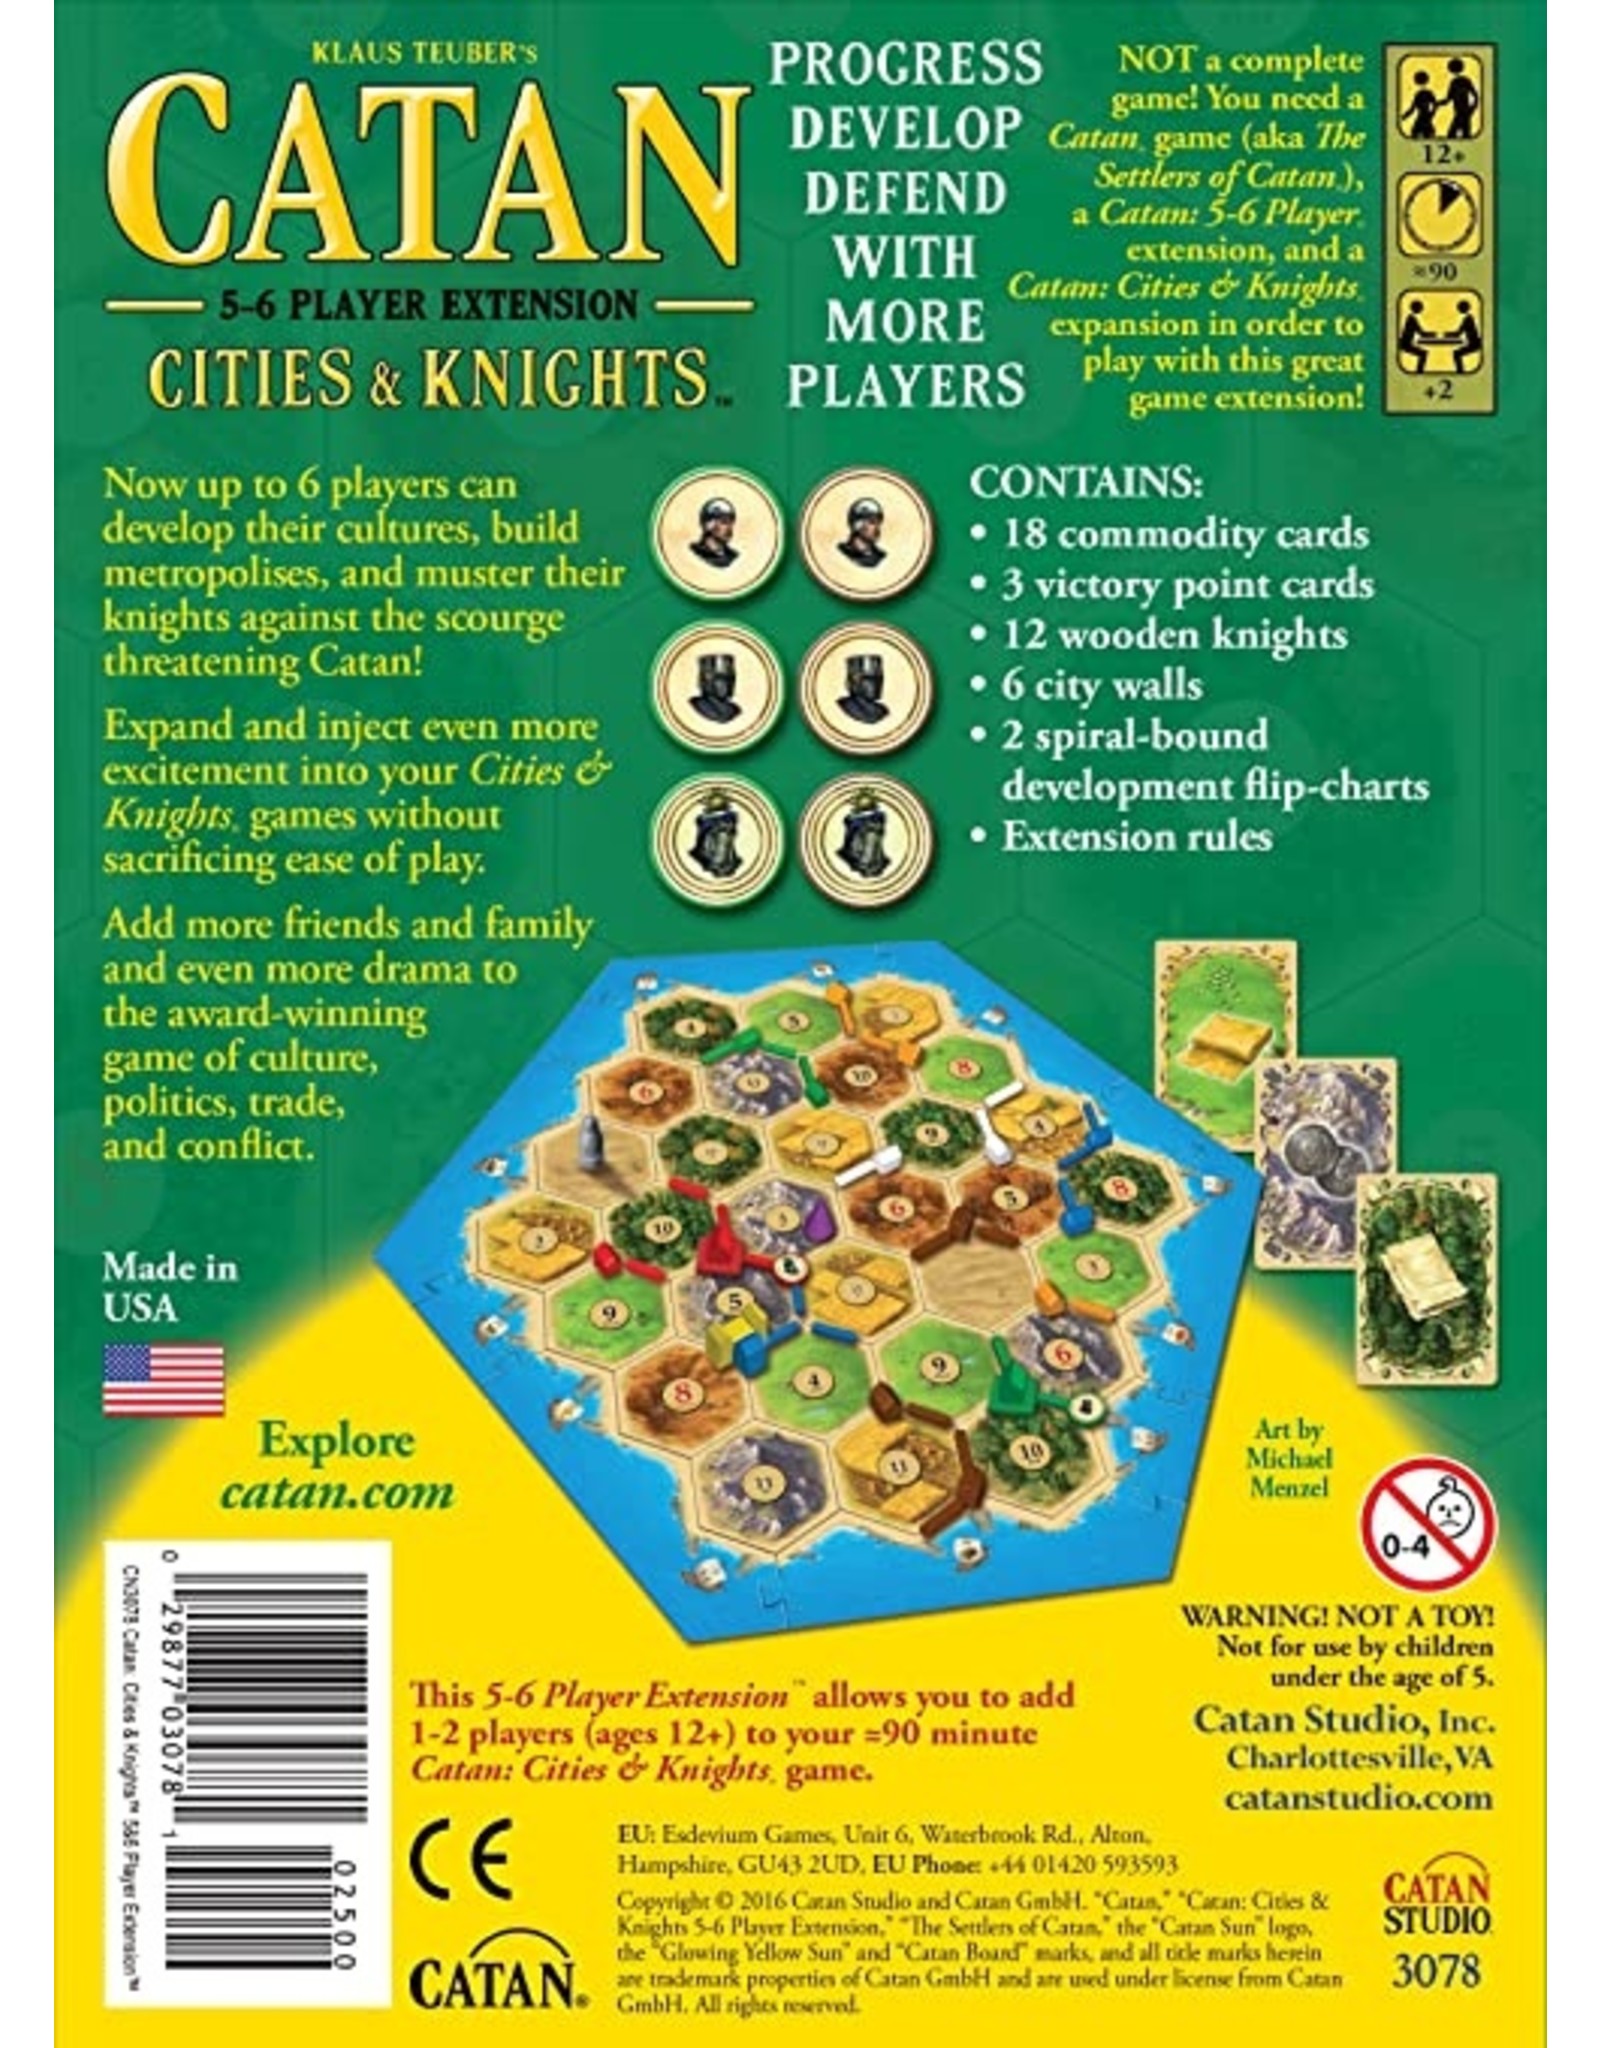 Catan Catan Cities and Knights: 5-6 Player Extension